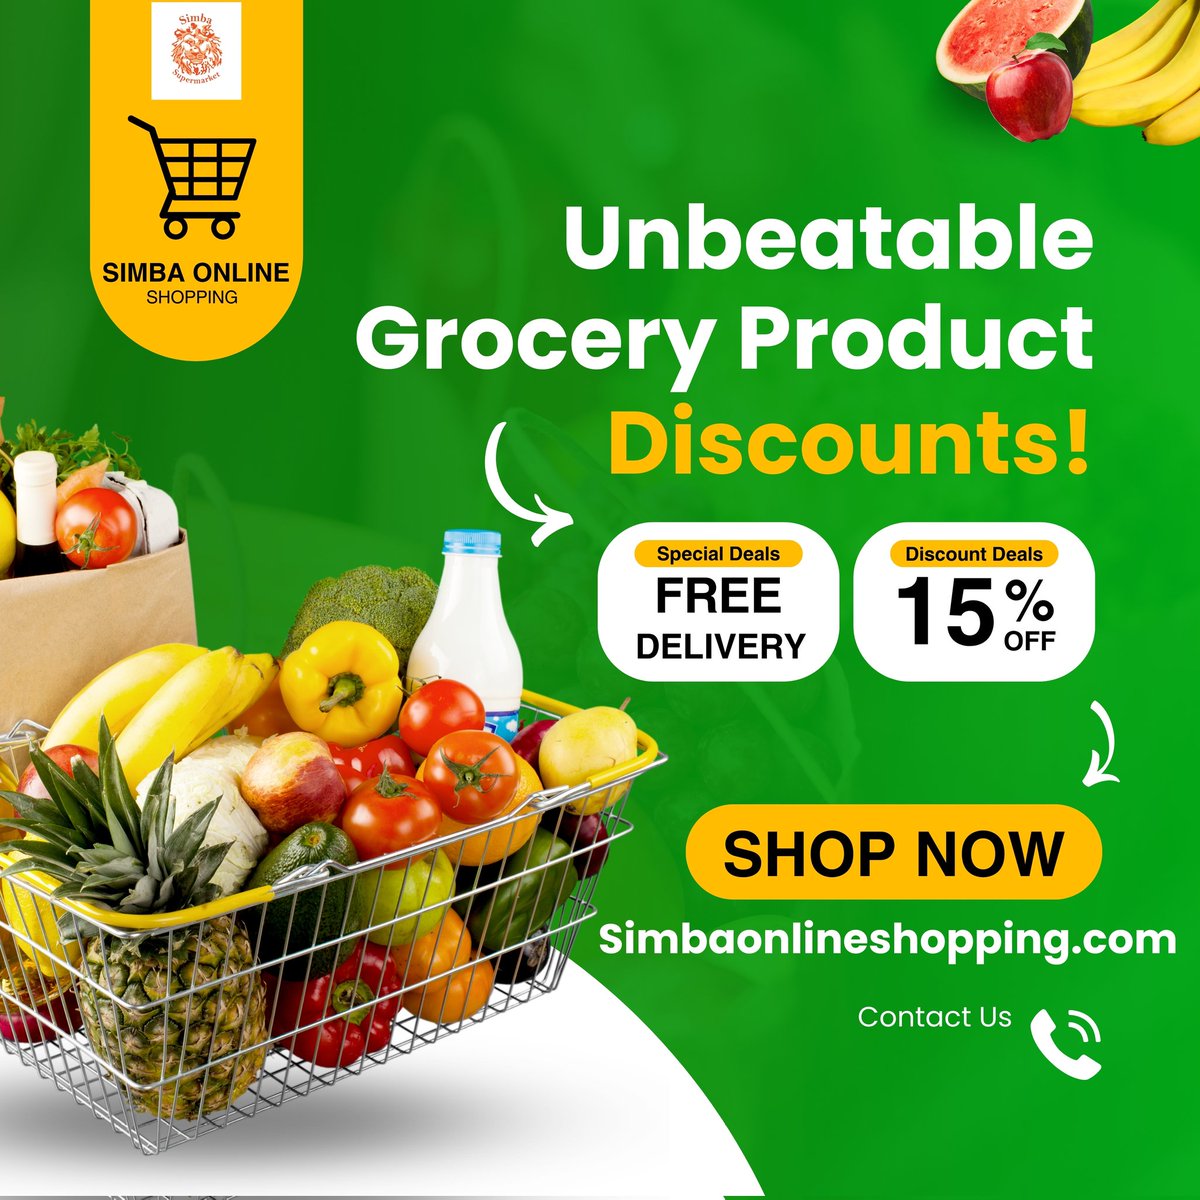 Farm-fresh goodness, delivered to your doorstep! 🍏🥦 Order now for a taste of nature's bounty. 🌱 #OnlineGrocery #SimbaSupermarket 
simbaonlineshopping.com